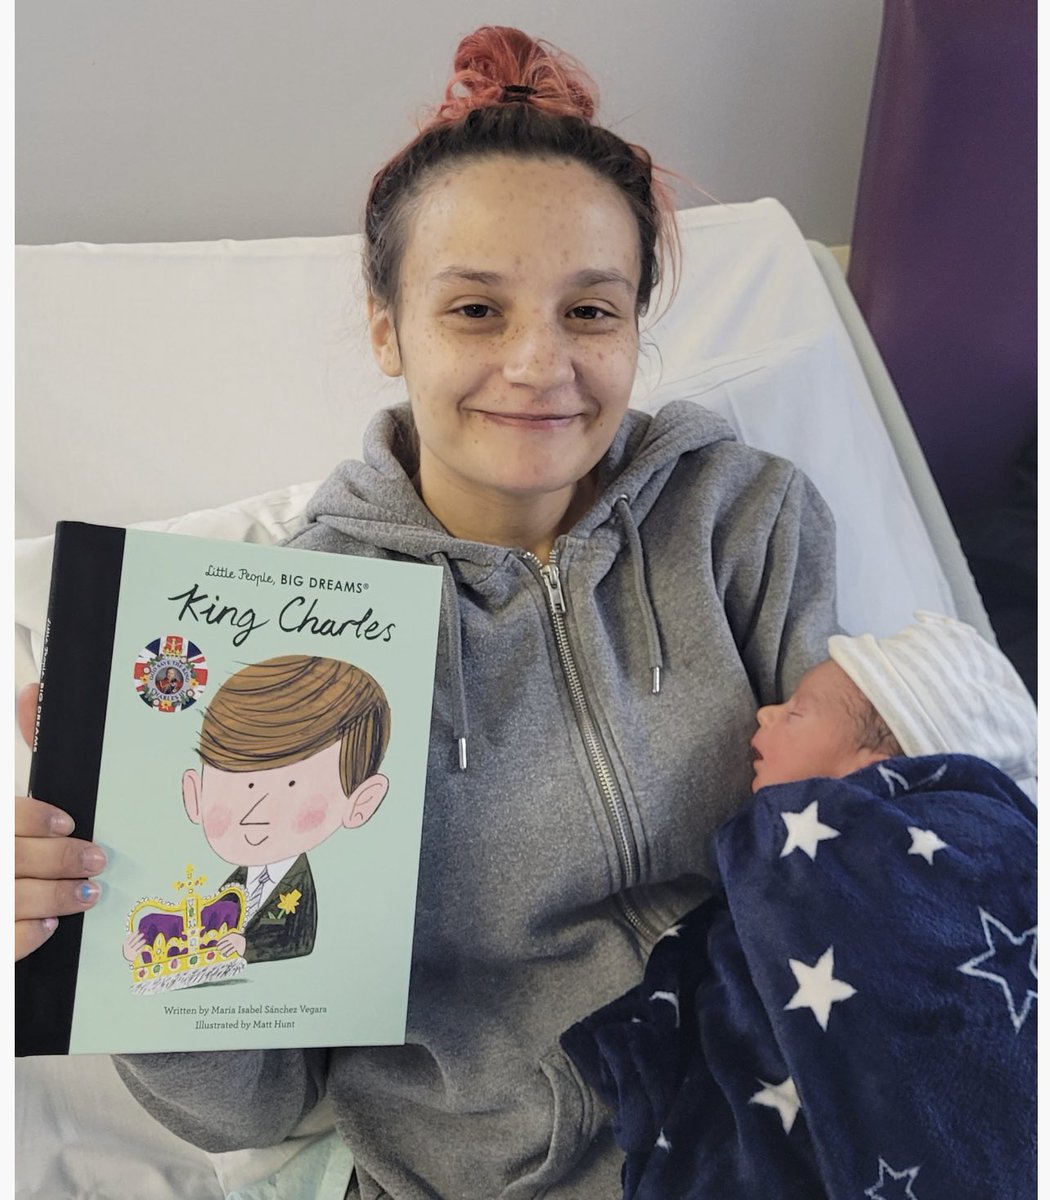 @RoyalFamily as the day draws to a close @WalsallHcareNHS maternity we present one of our little “Kings for the day” fast a sleep & dreaming big (mother has given consent to use photo😊) @local_maternity @MvpWalsall @charlec17 @AqeelaHam @vpickford21 @TrishaSRM @JulieNewton8 😍